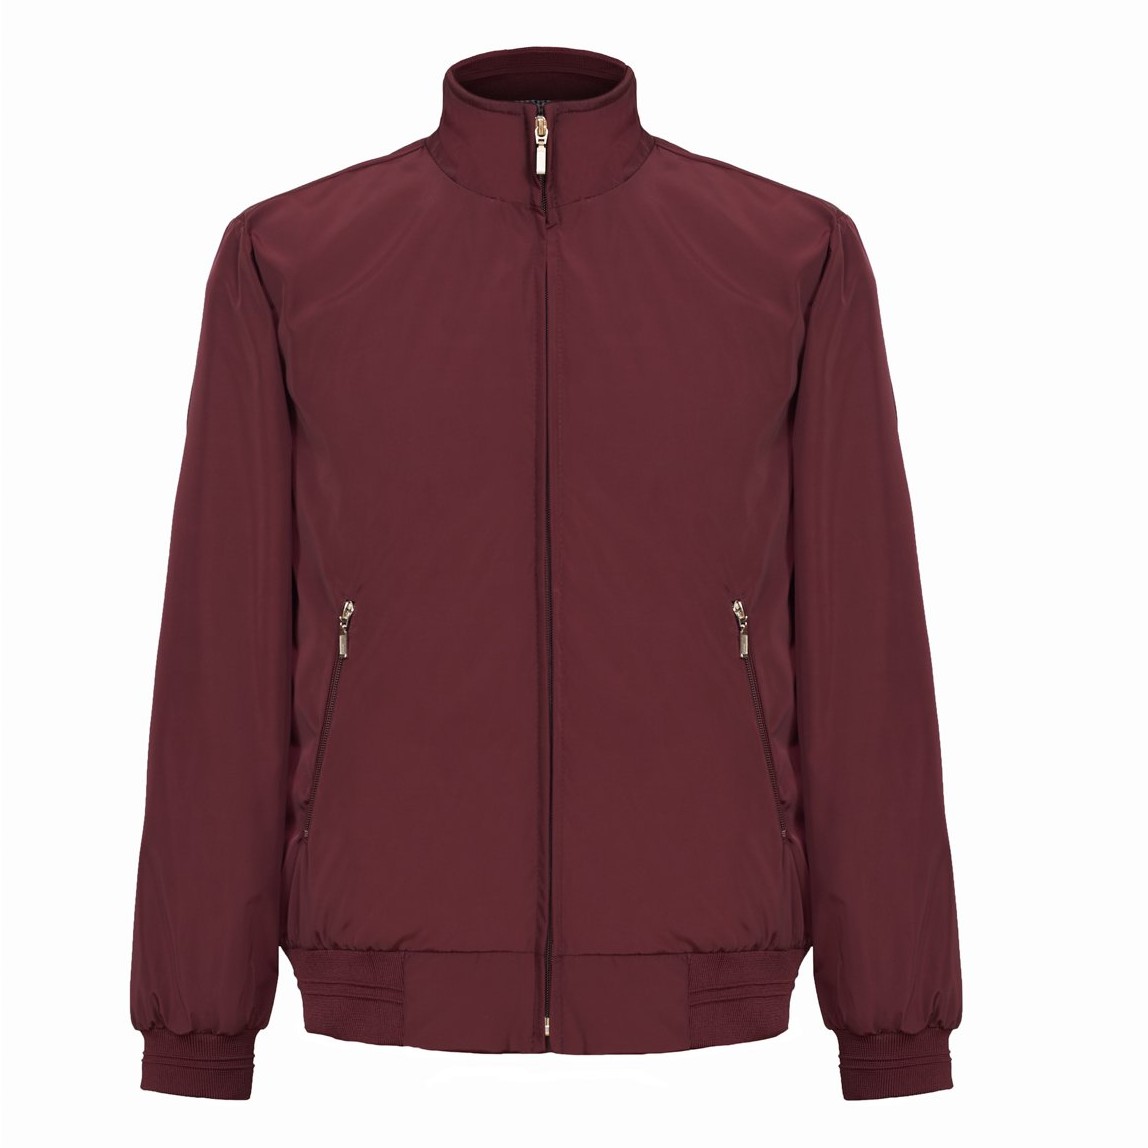 Unisex Fine Polyester Jacket- Delicias Style- Wine Red Color